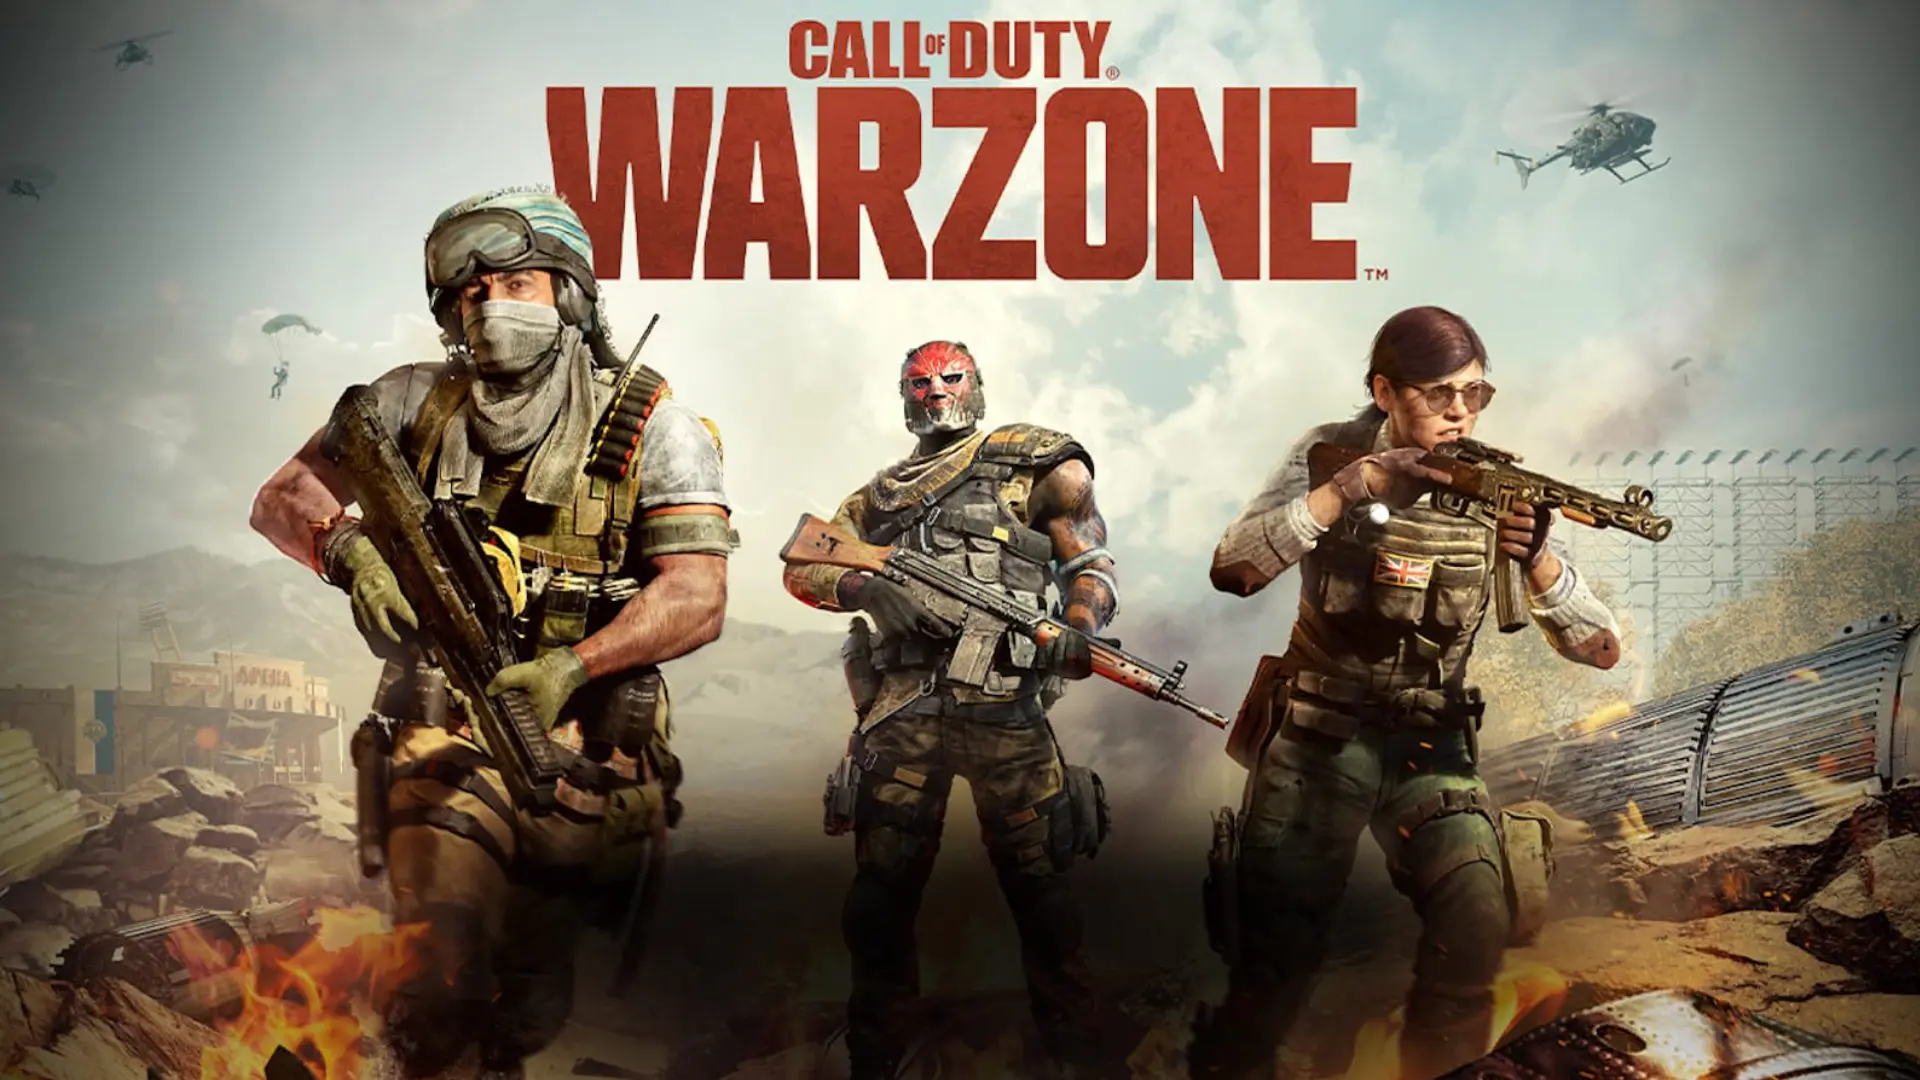 Call of Duty Warzone and Vanguard Crossover